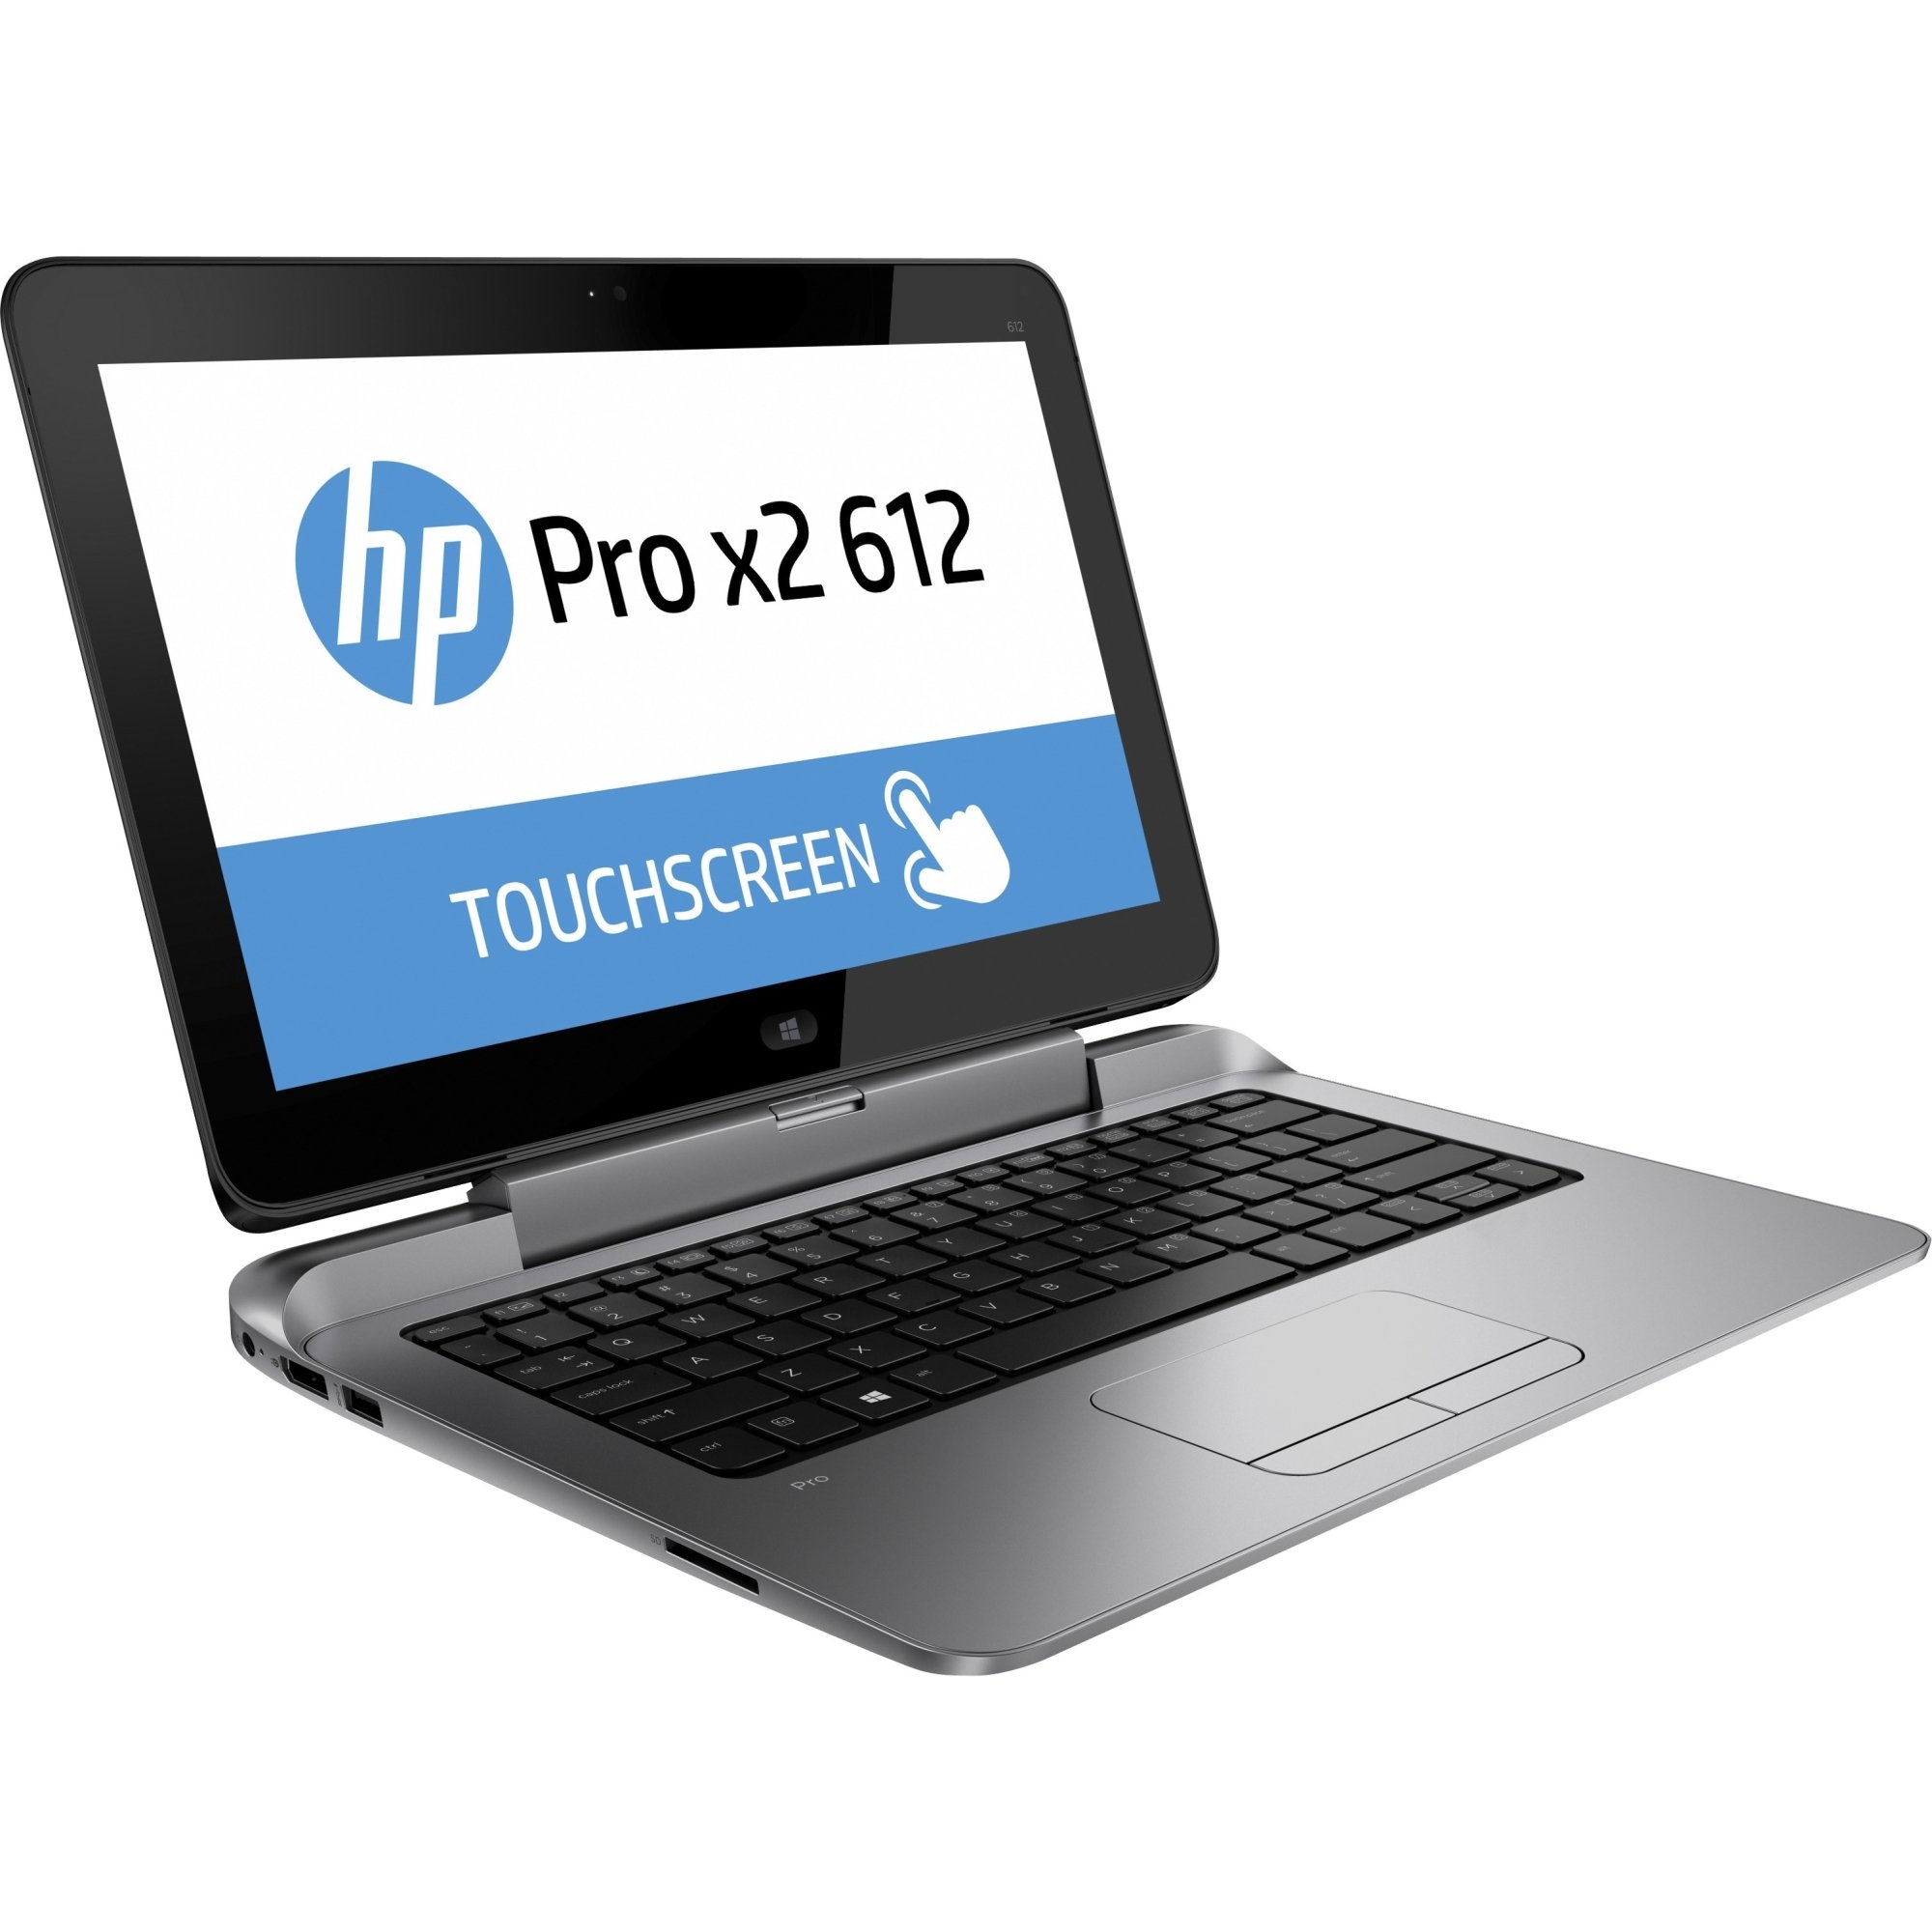 Pro x2 612 G1 Tablet with Power Keyboard